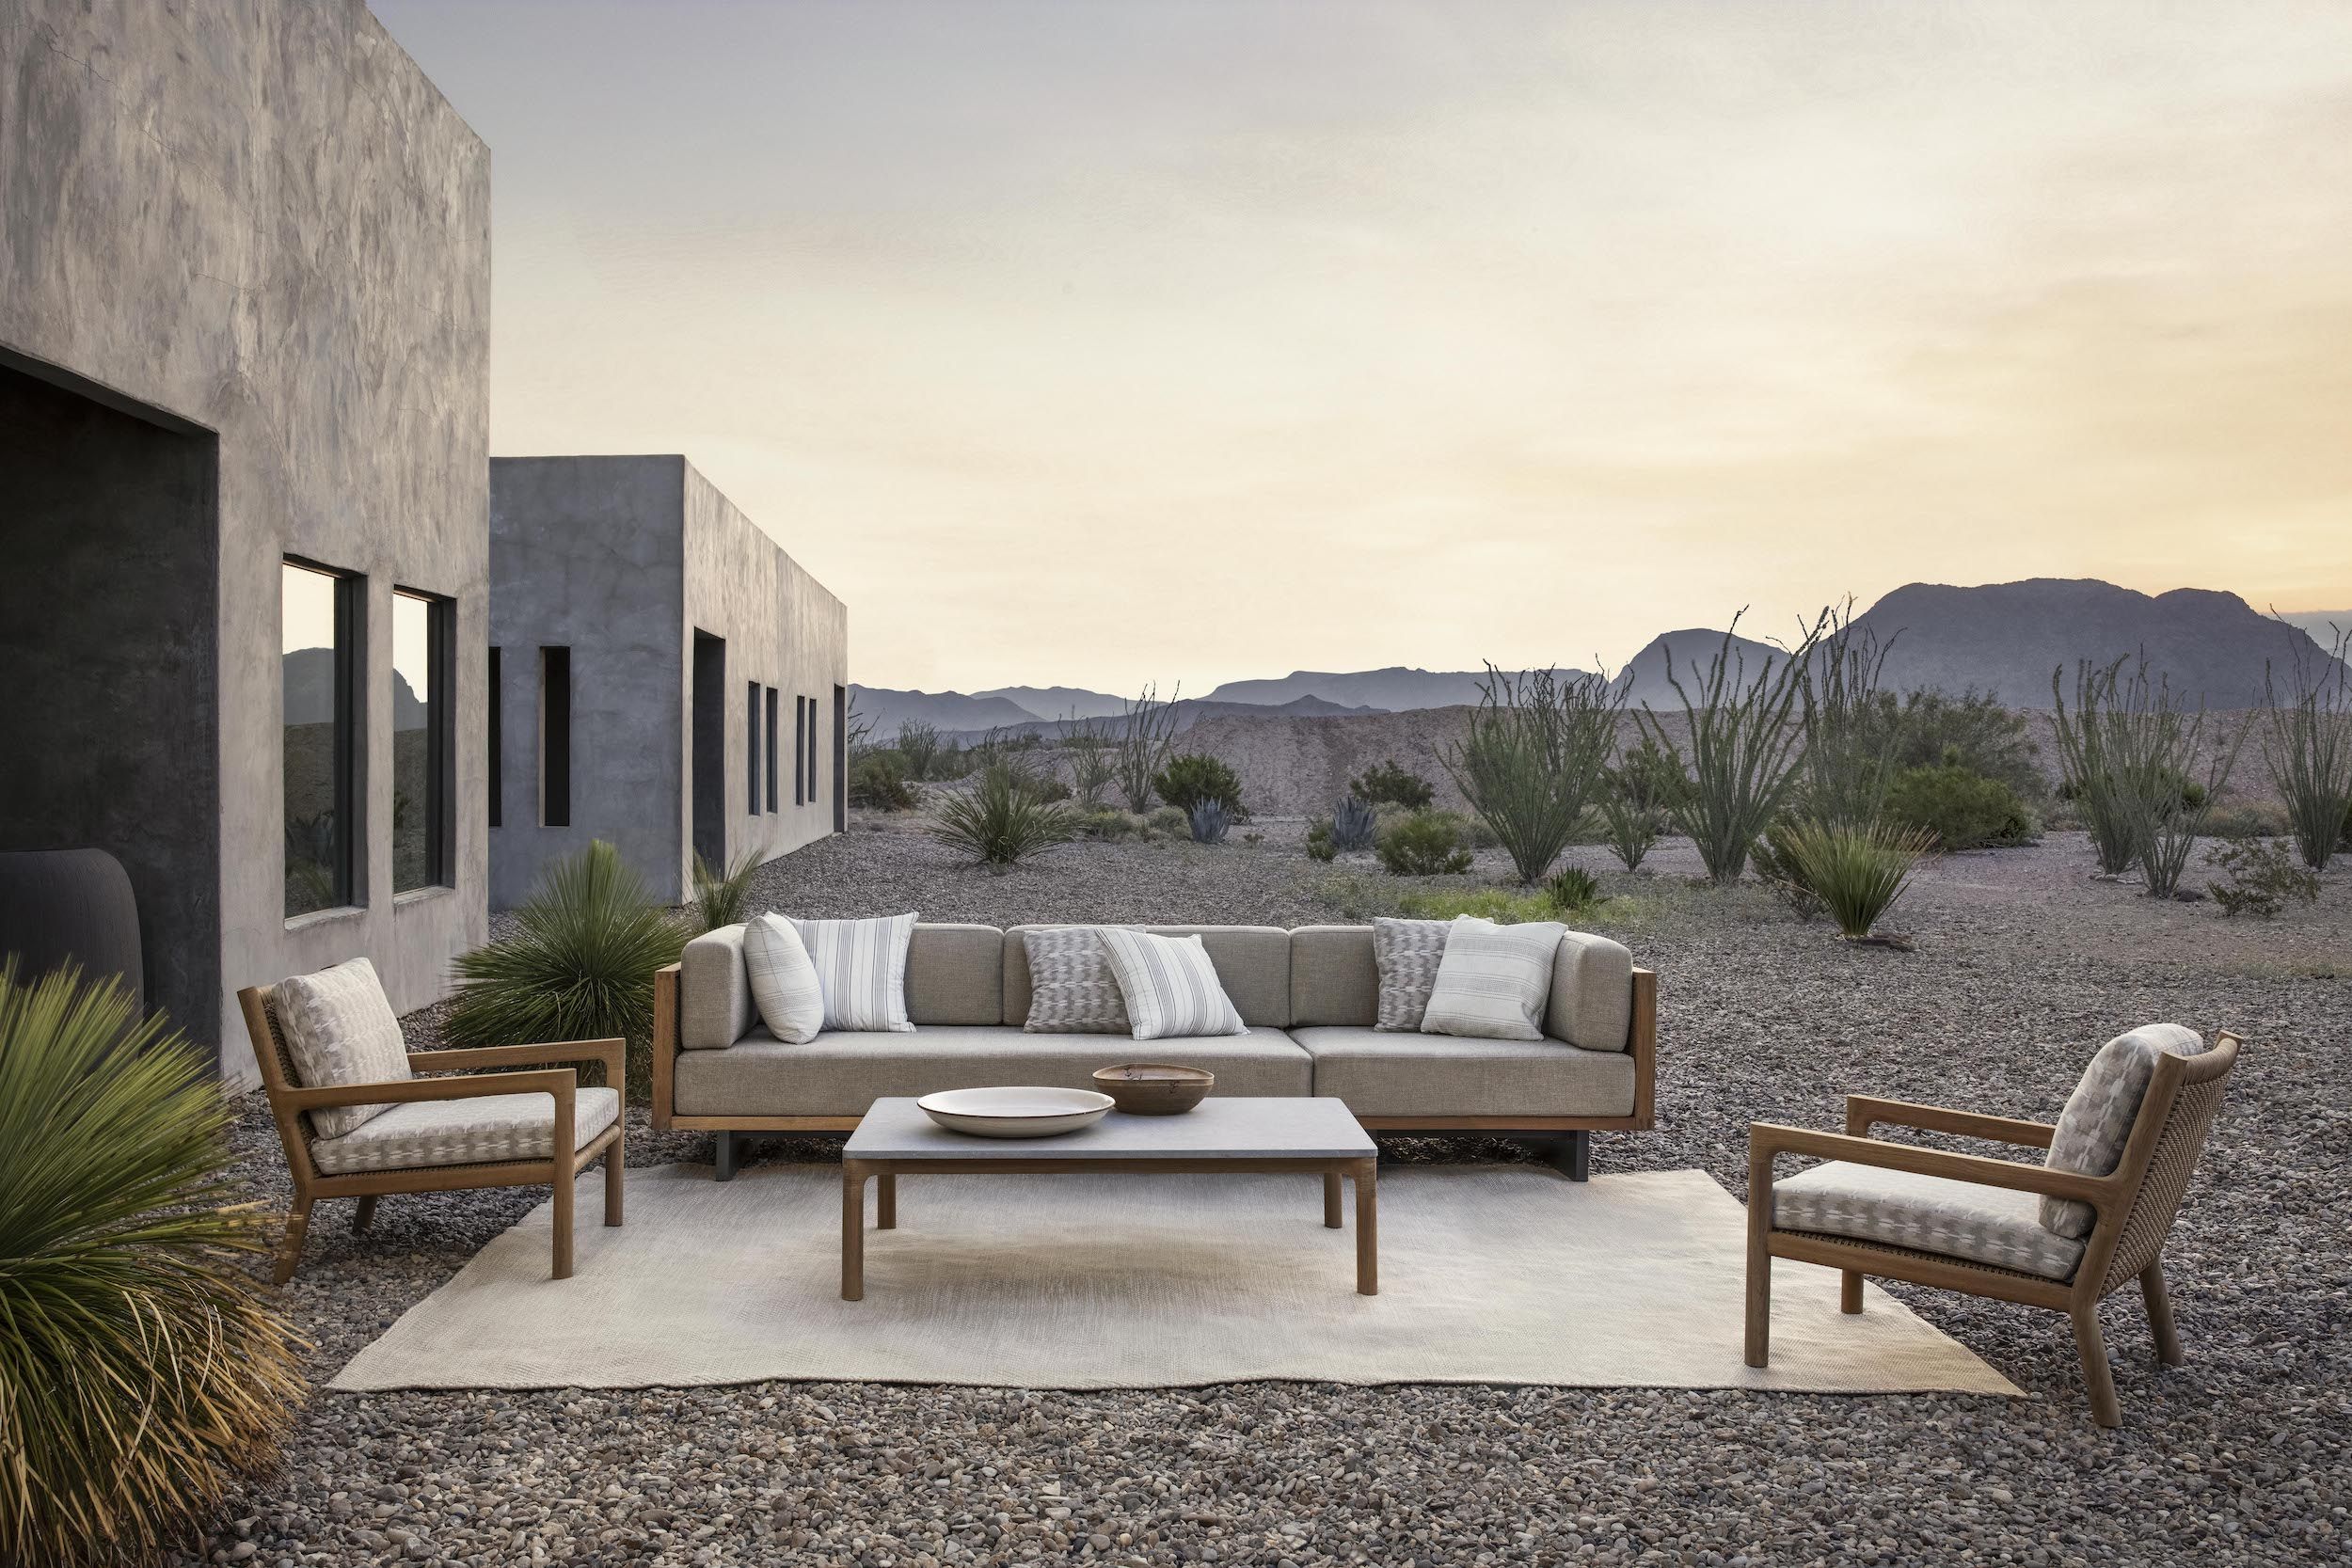 Stylish Outdoor Furniture Designed To